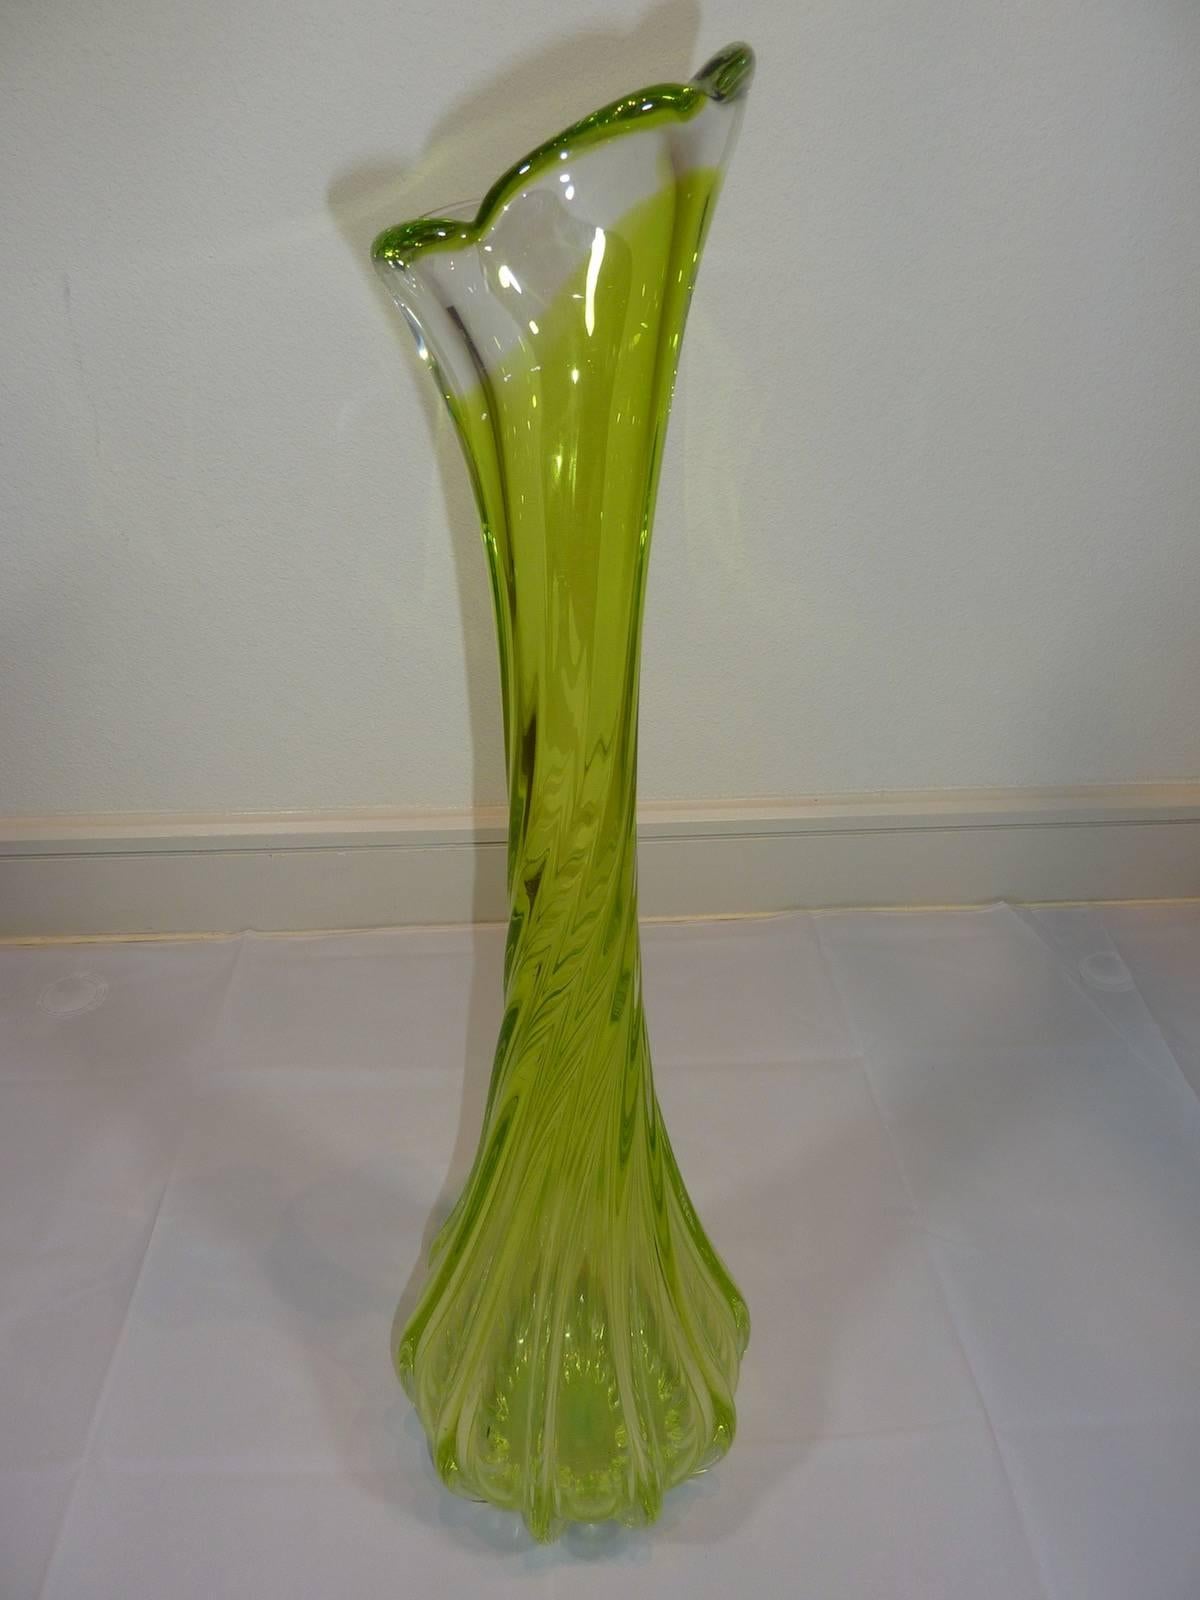 Beautiful Italian vase, dating circa 1960s. The lime green and clear glass swirls down to the ground. Made in Murano, Italy.